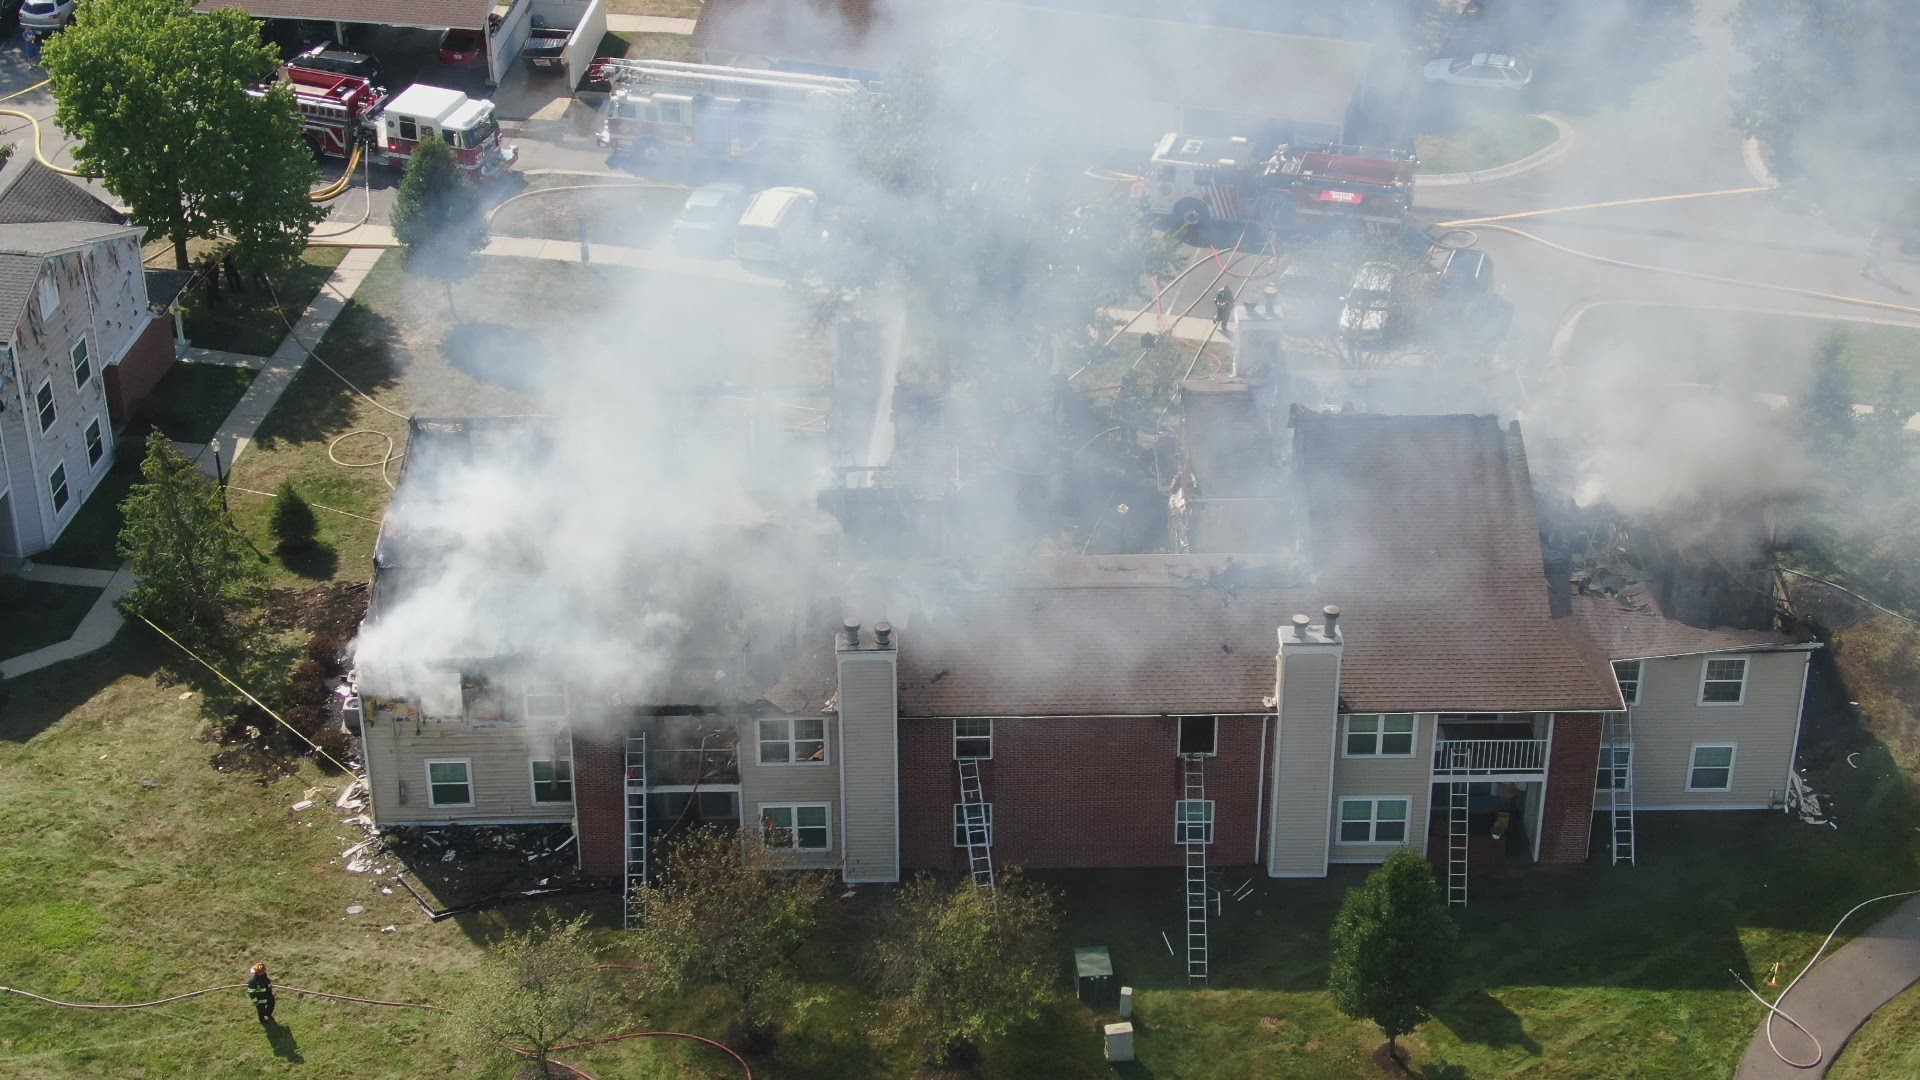 Several apartments were heavily damaged by fire Tuesday afternoon in Fishers.